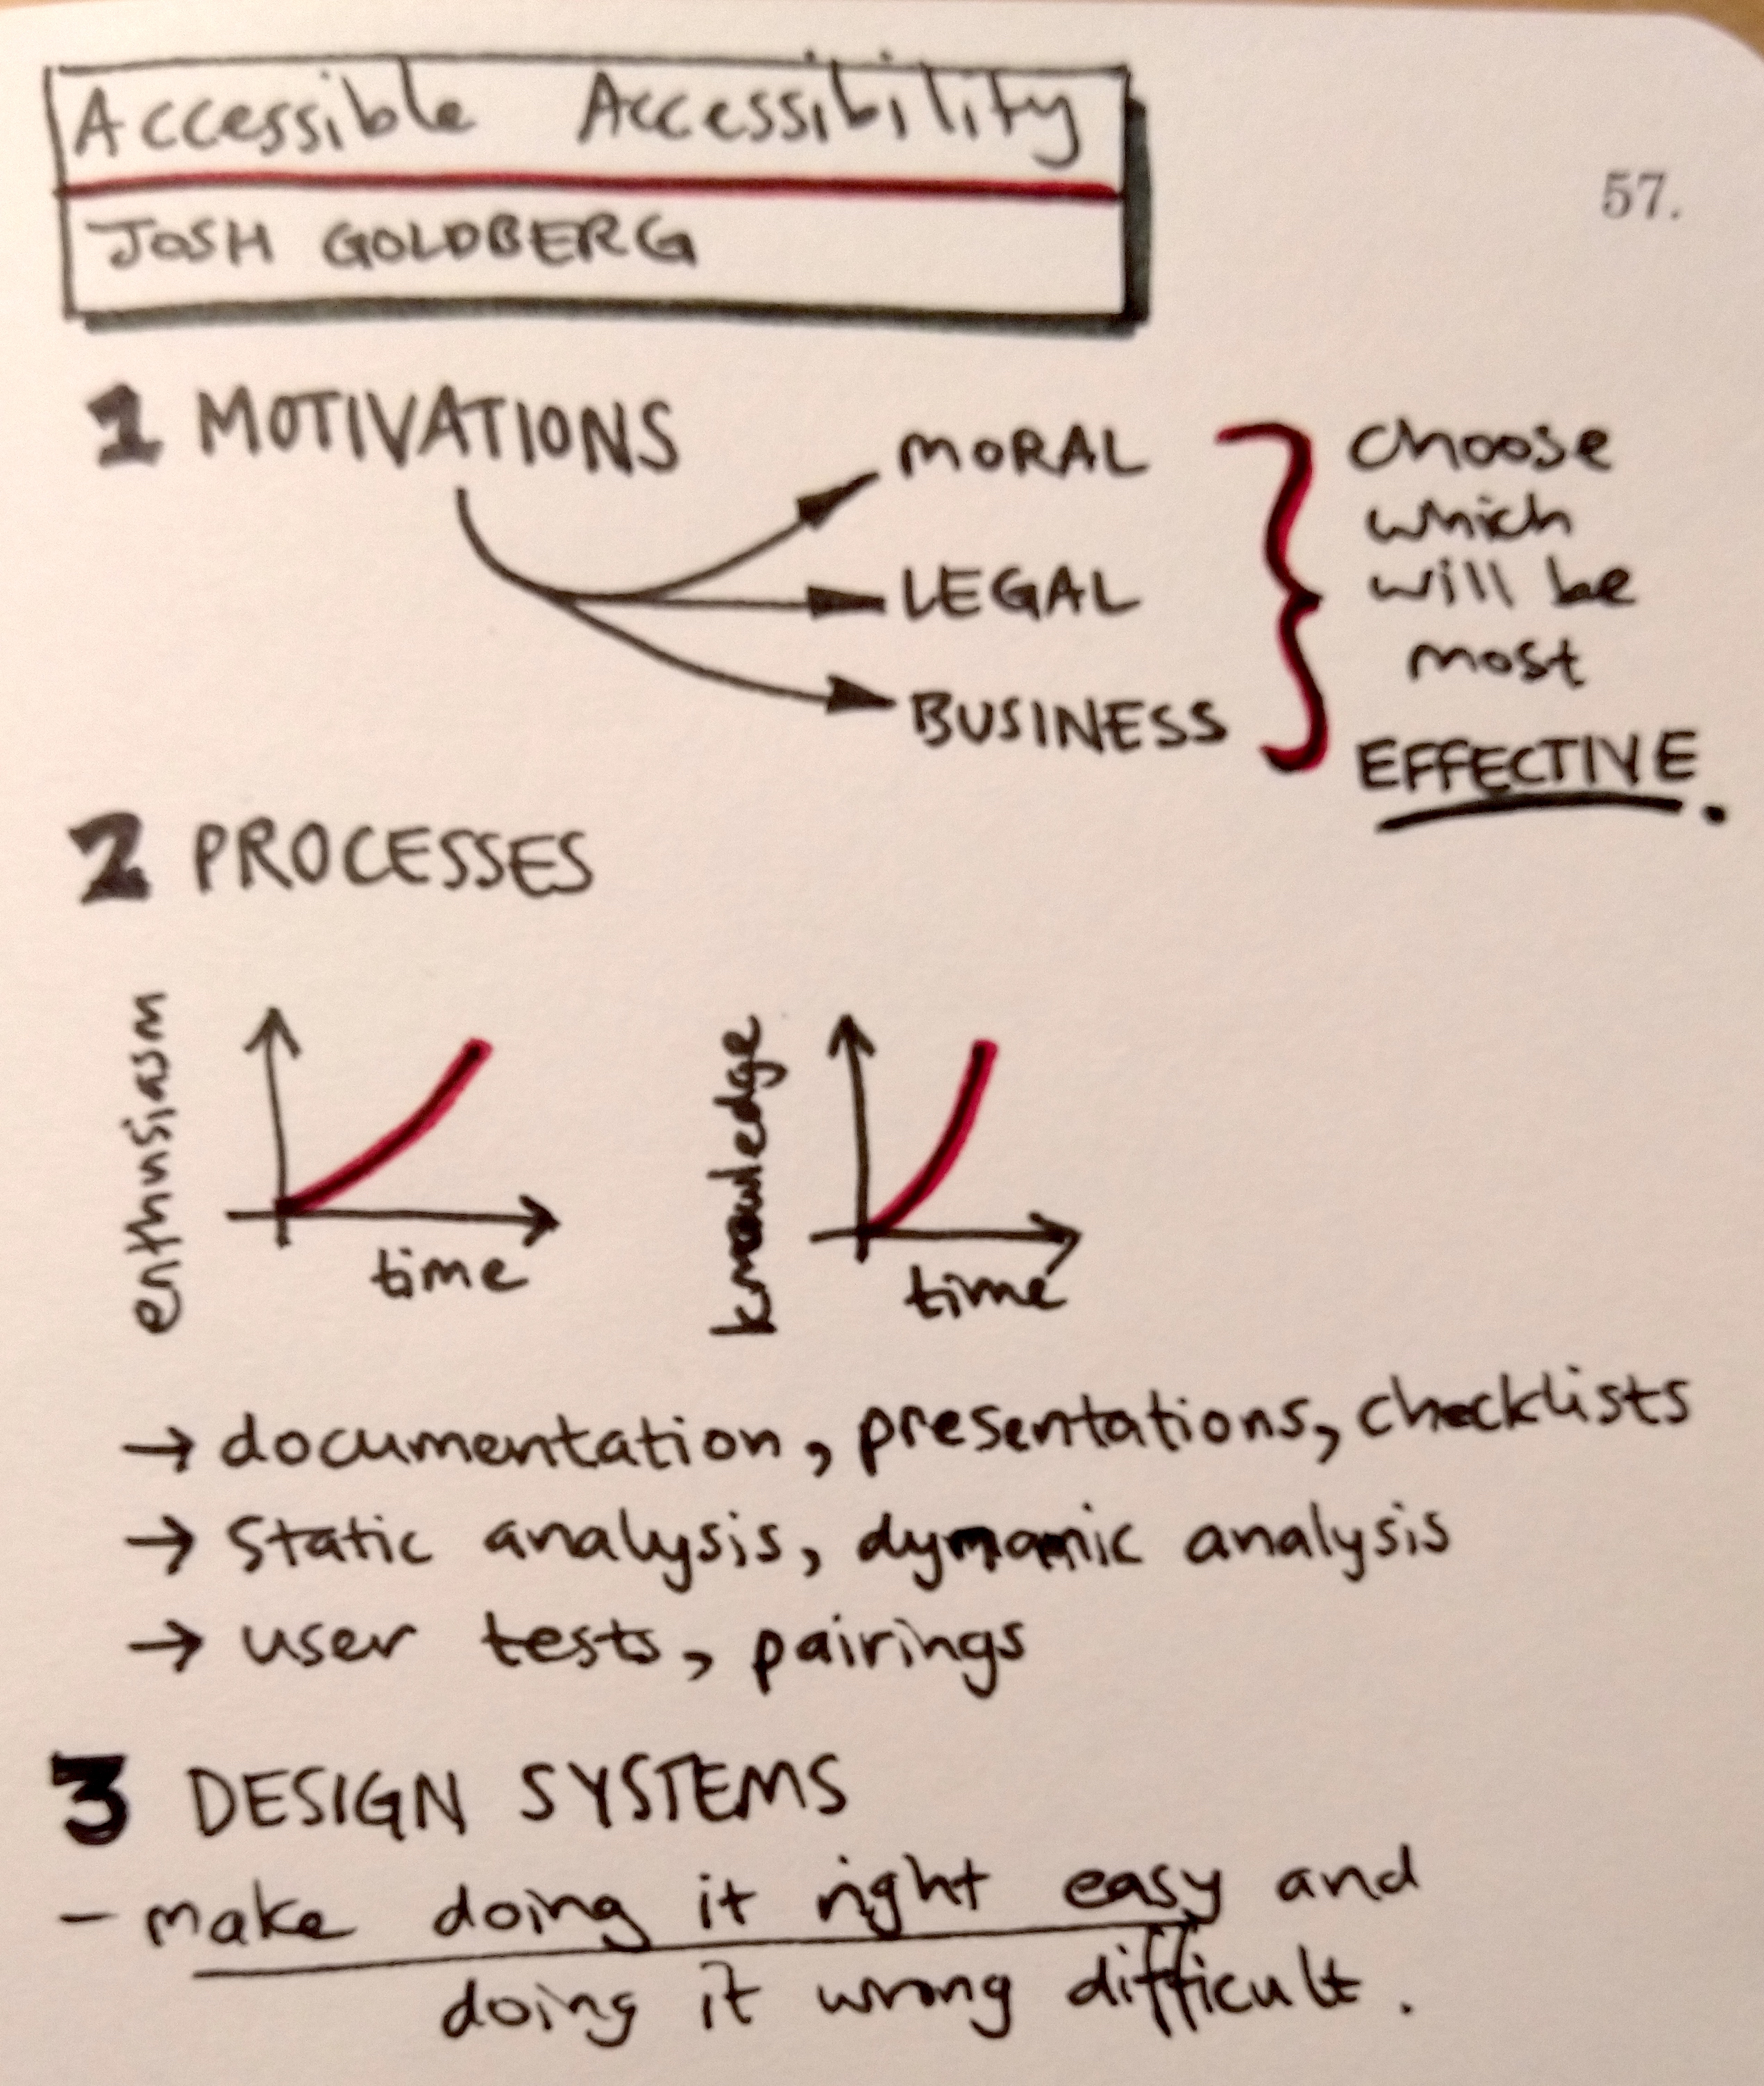 Sketchnotes for Josh Goldberg - Accessible Accessibility